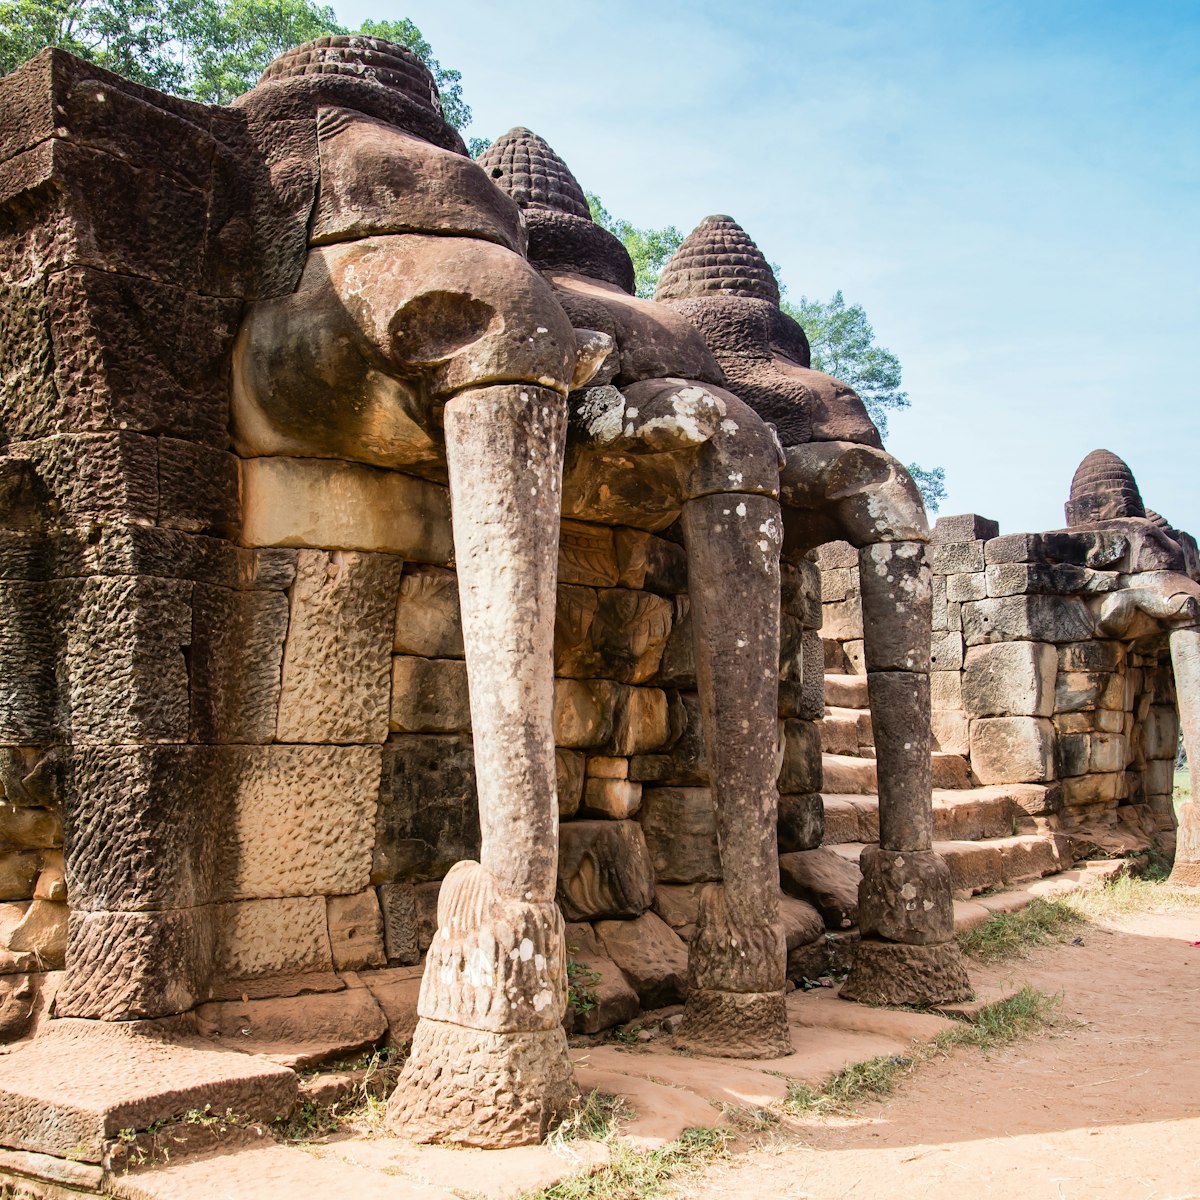 Terrace of the Elephants in Angkor Thom.